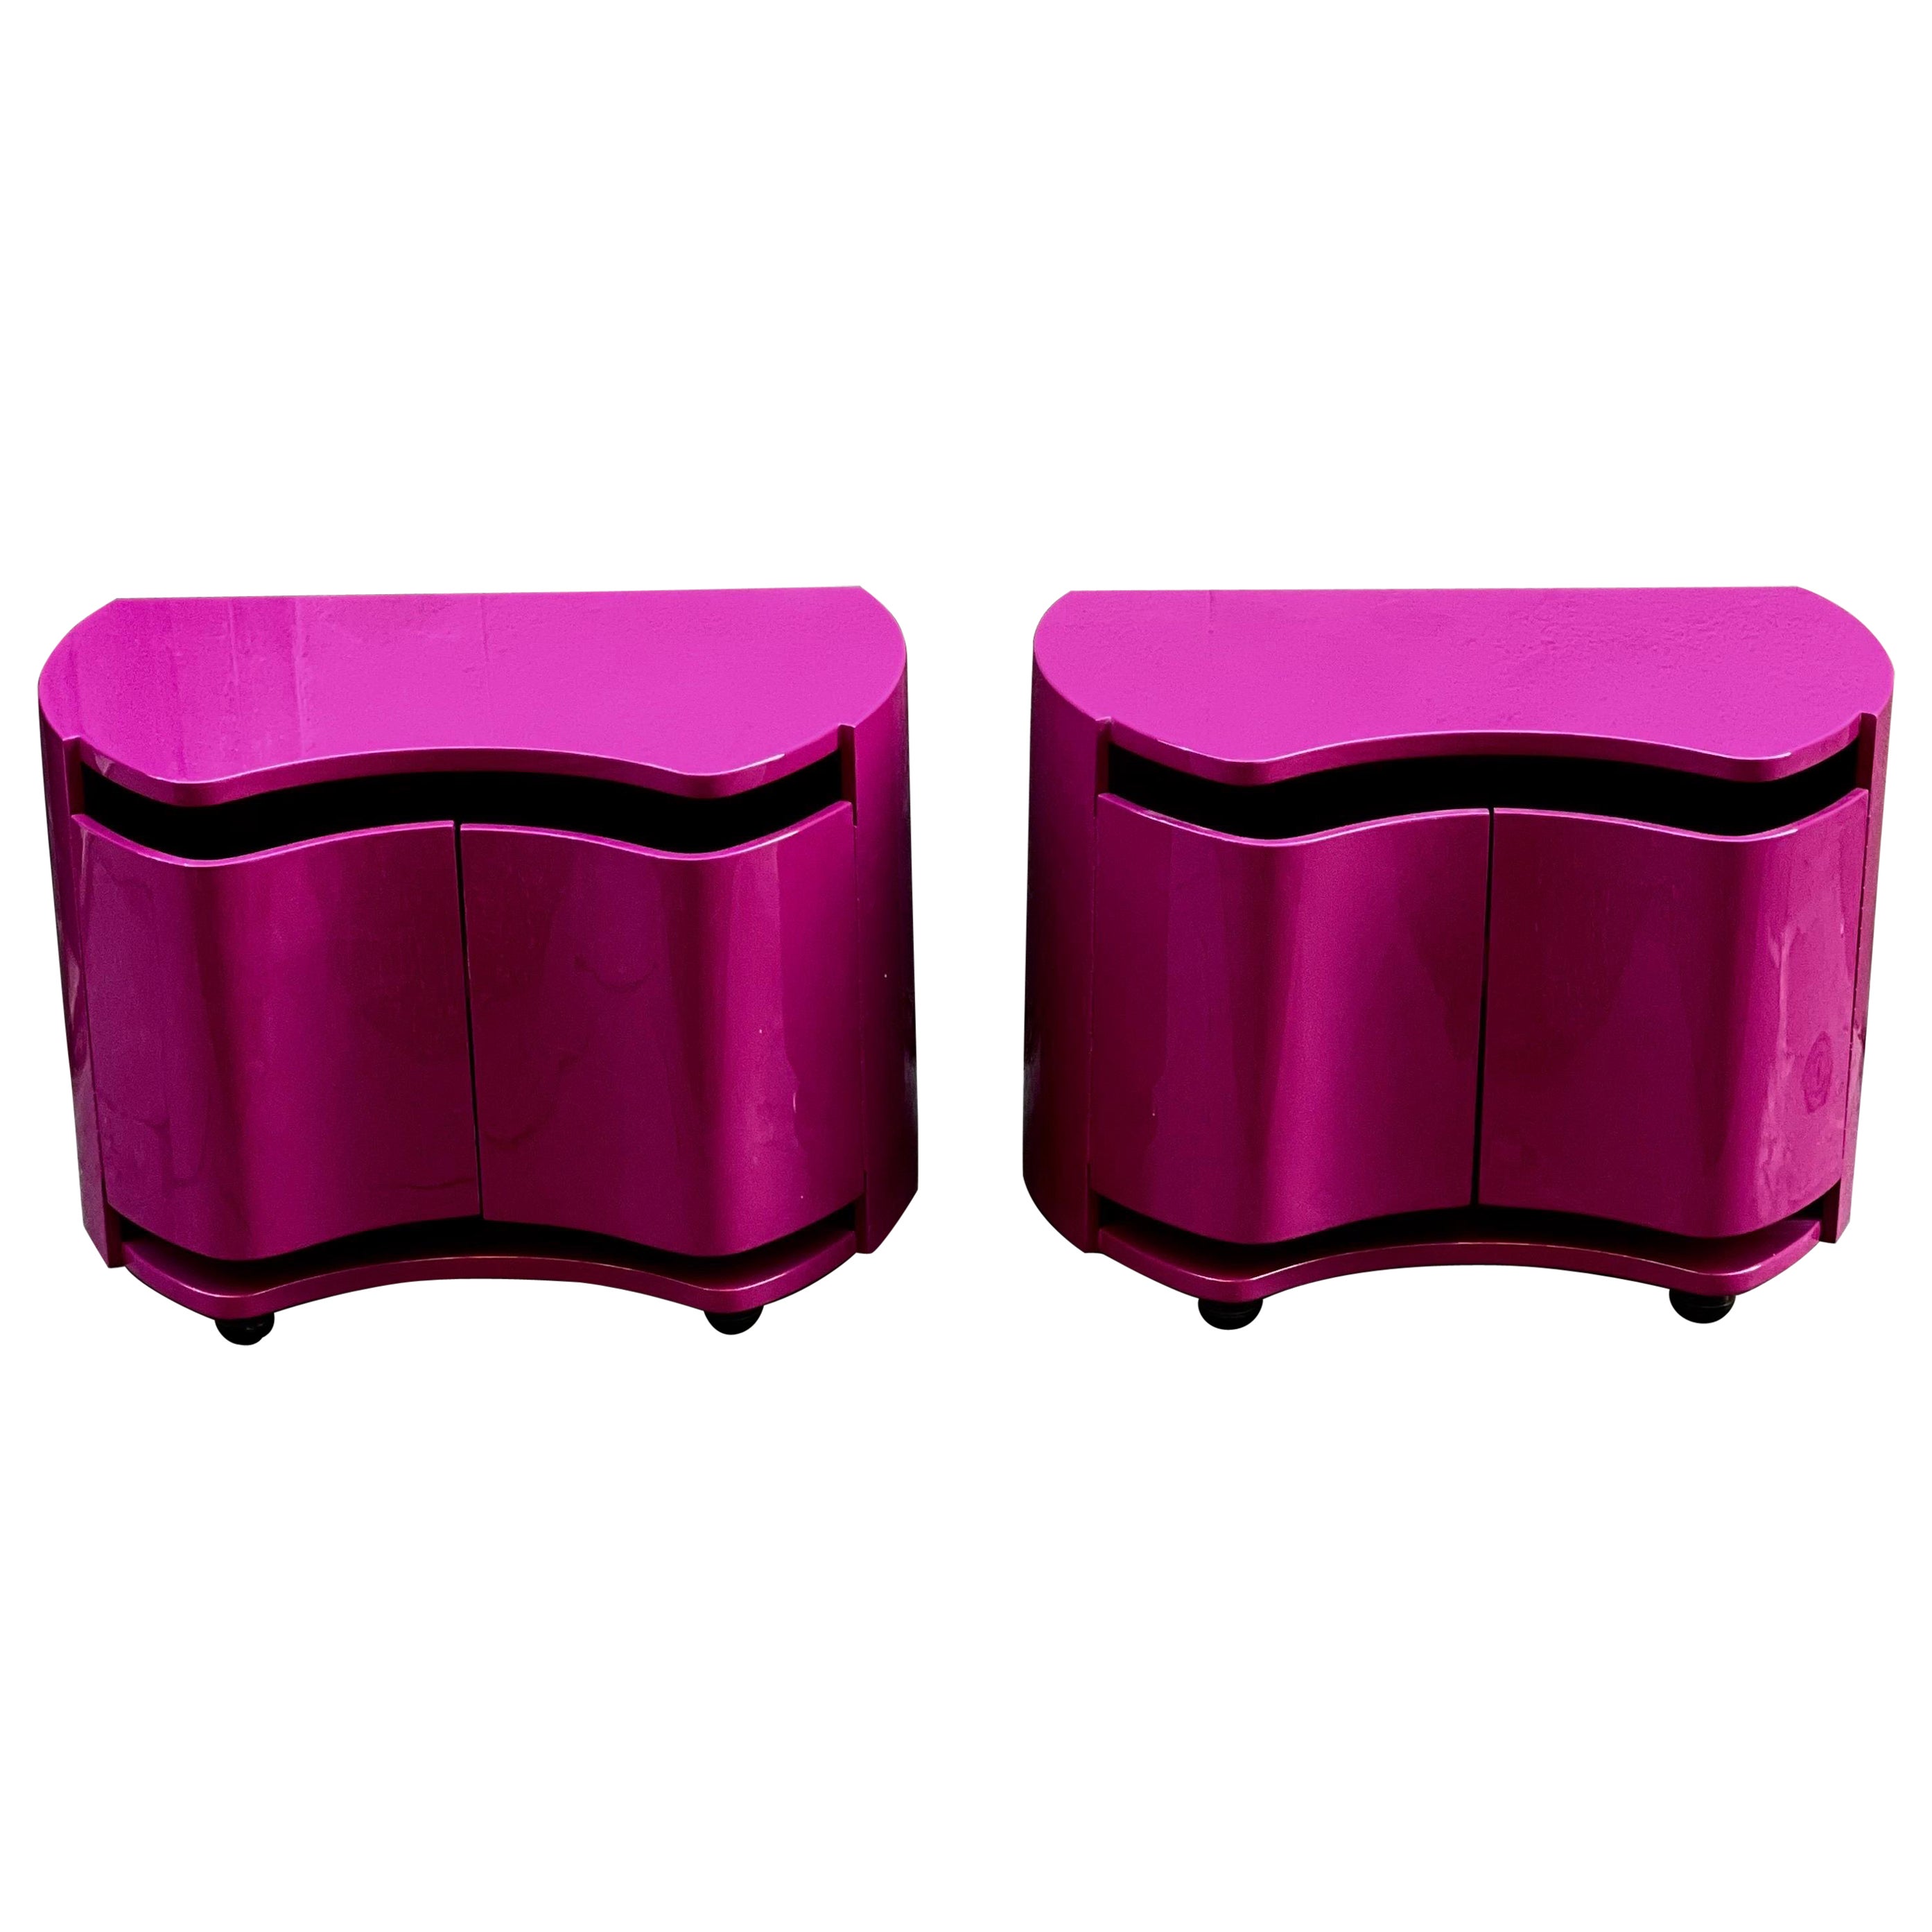 Pair of Cyclamen Colour Lacquered Resin Night Stands by Benatti Italy, 1966 For Sale